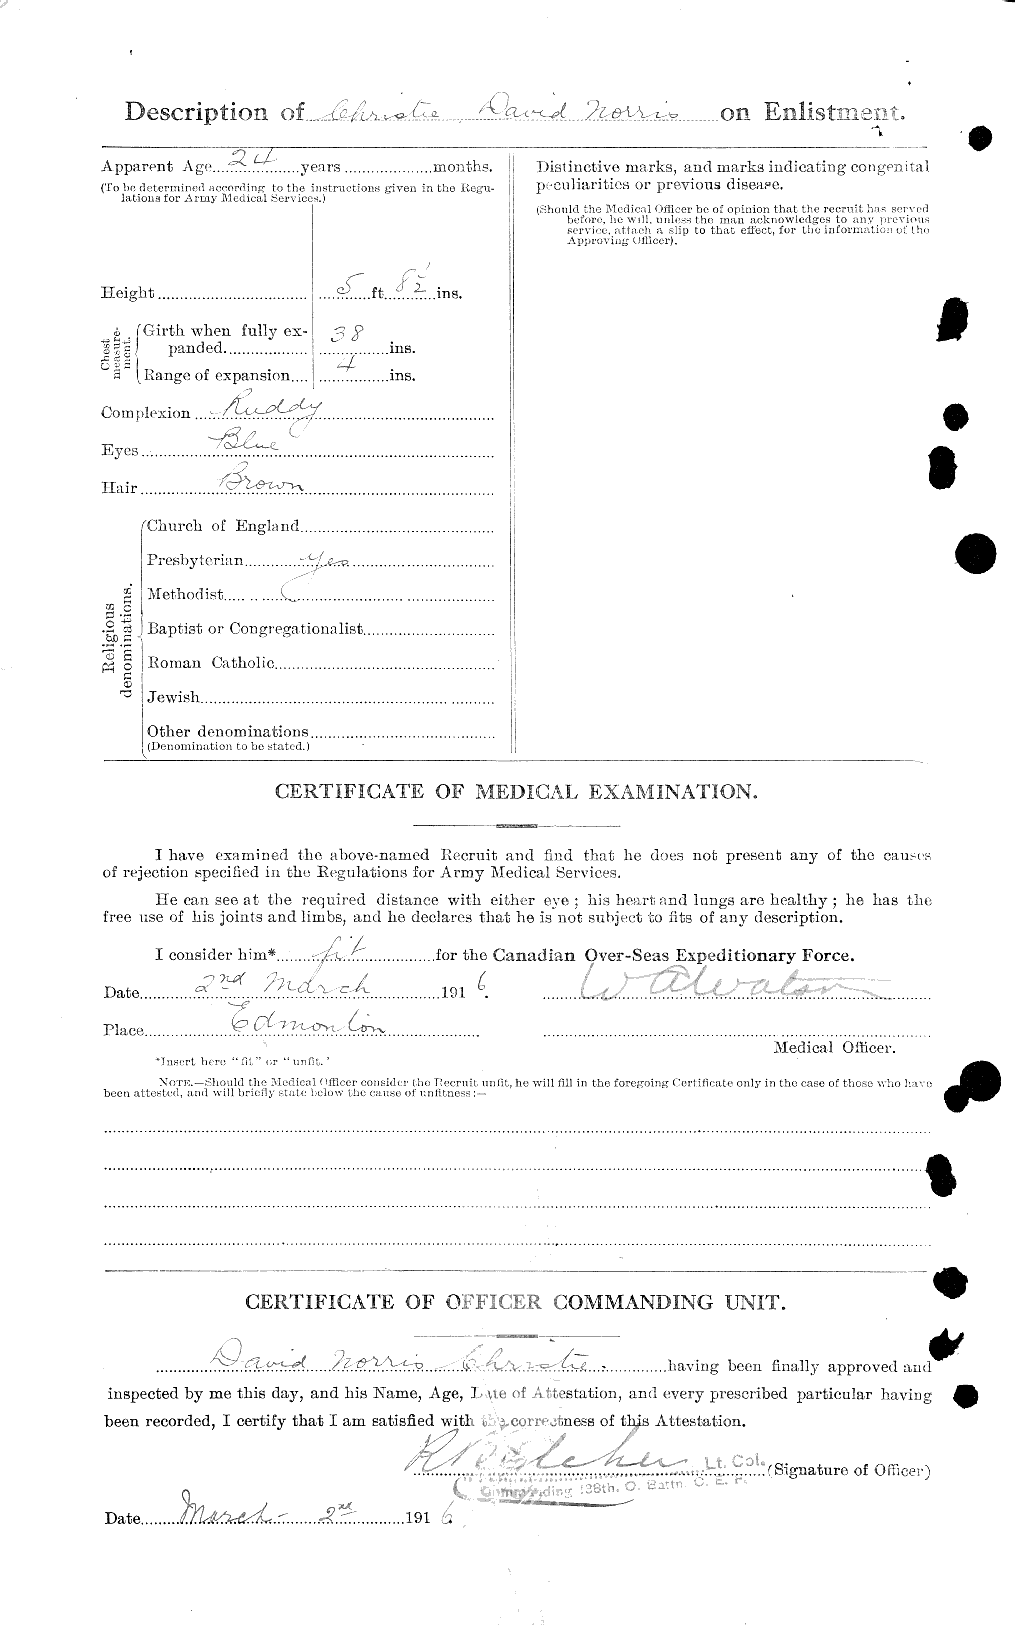 Personnel Records of the First World War - CEF 021908b